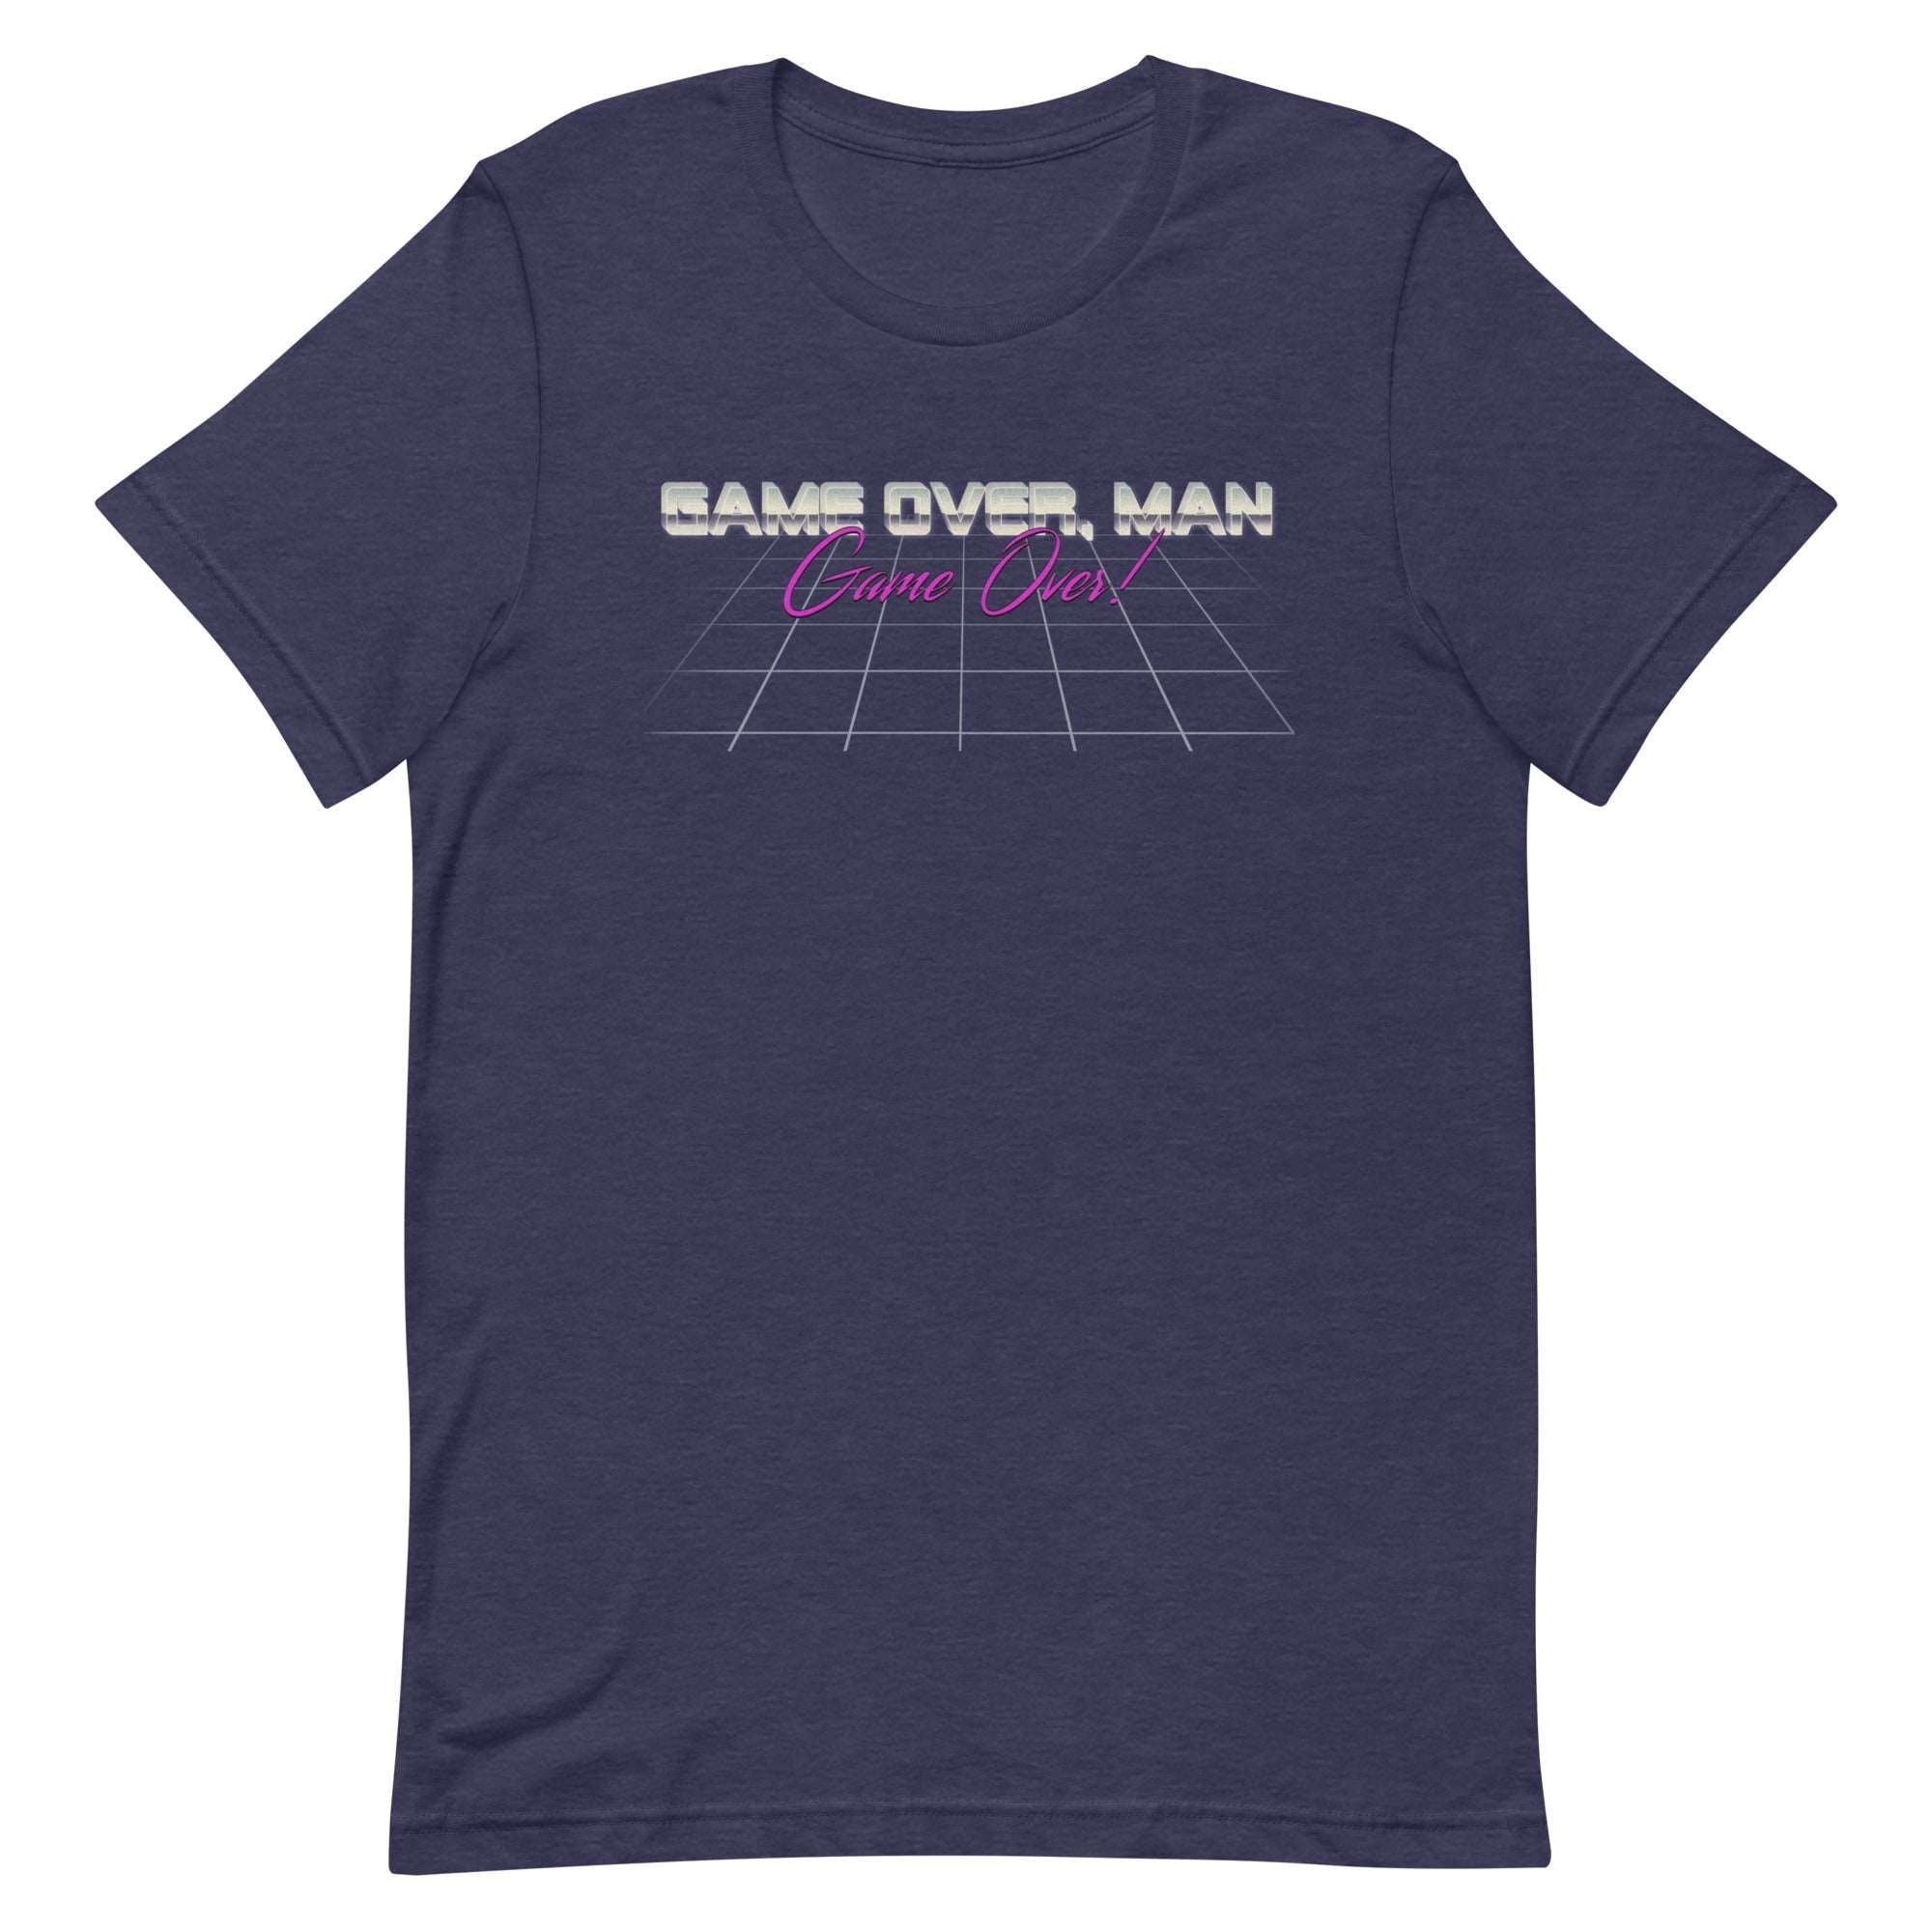 a t - shirt with the words save over man on it